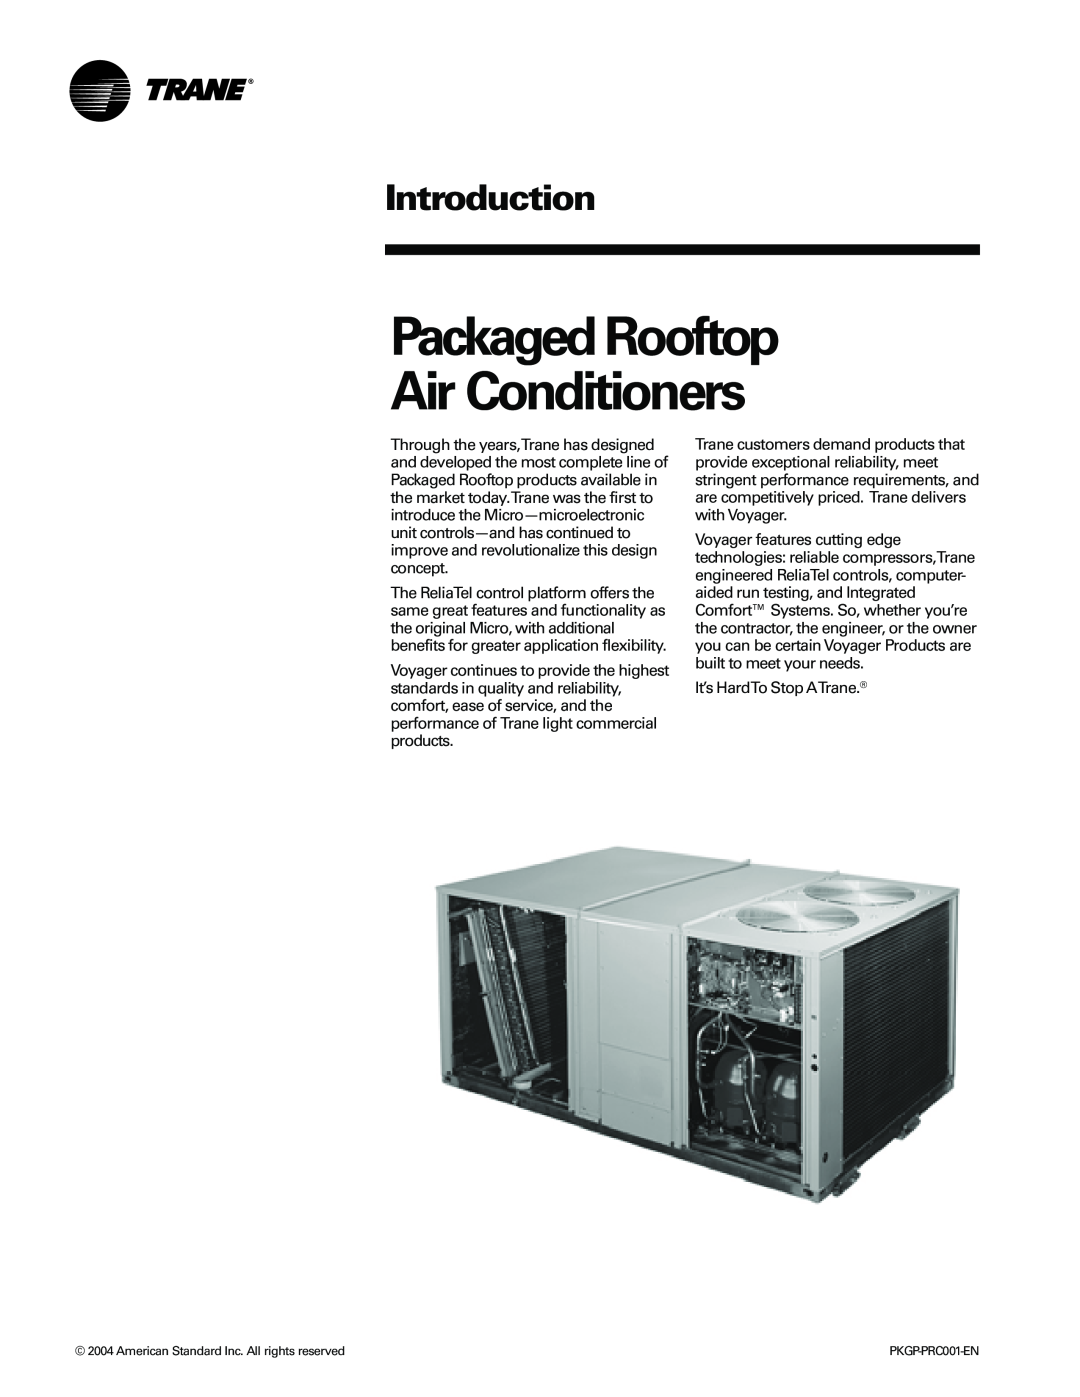 Trane PKGP-PRC001-EN manual Introduction, Packaged Rooftop Air Conditioners 